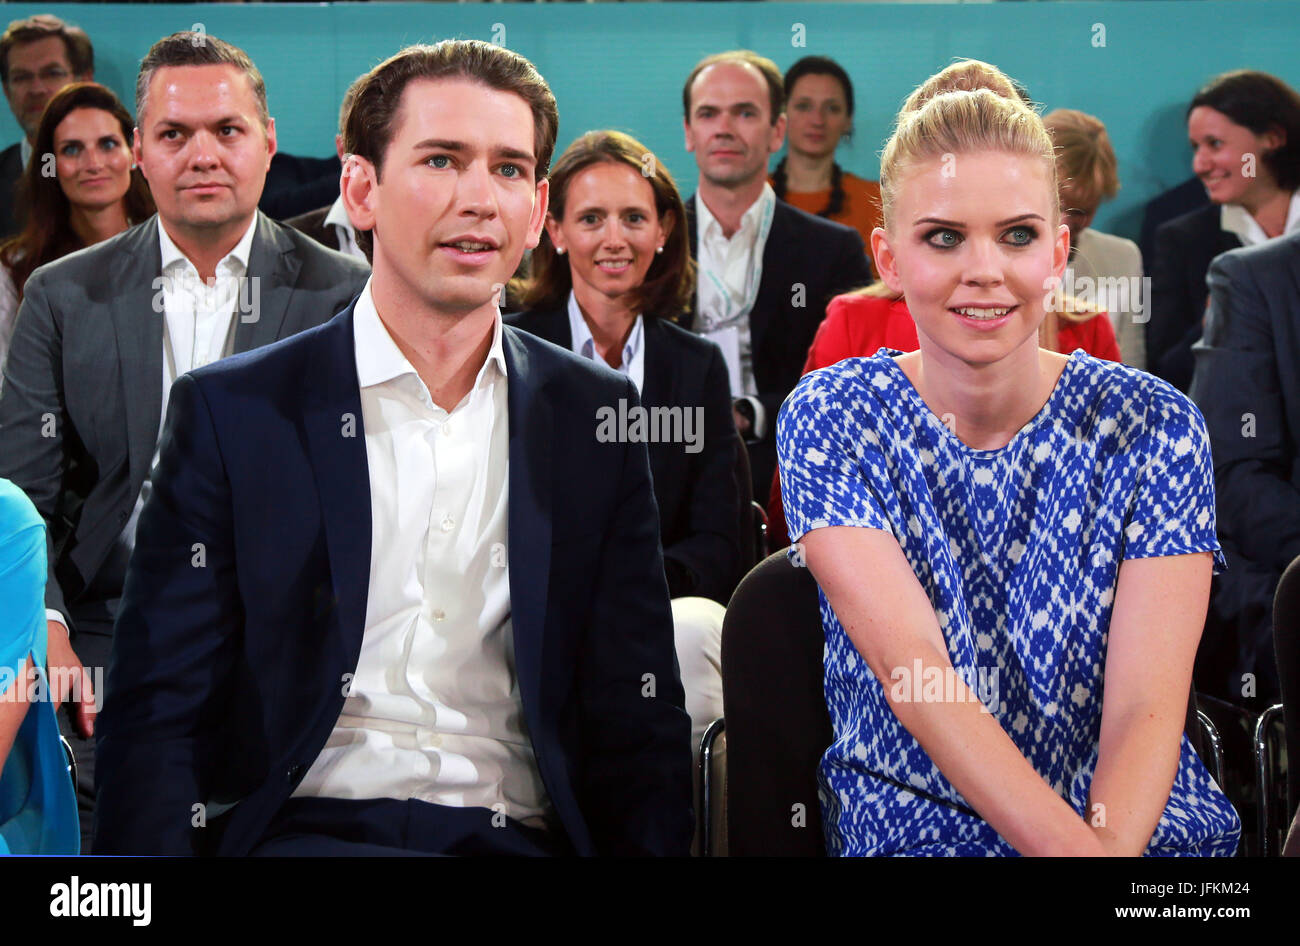 Linz, Austria. 1st July, 2017. Austrian Foreign Minister Sebastian Kurz (L) attends the national congress of the People's Party in Linz, Austria, July 1, 2017. Thirty-year-old Sebastian Kurz was elected as the leader of the People's Party at the congress in Linz on Saturday. Credit: Pan Xu/Xinhua/Alamy Live News Stock Photo